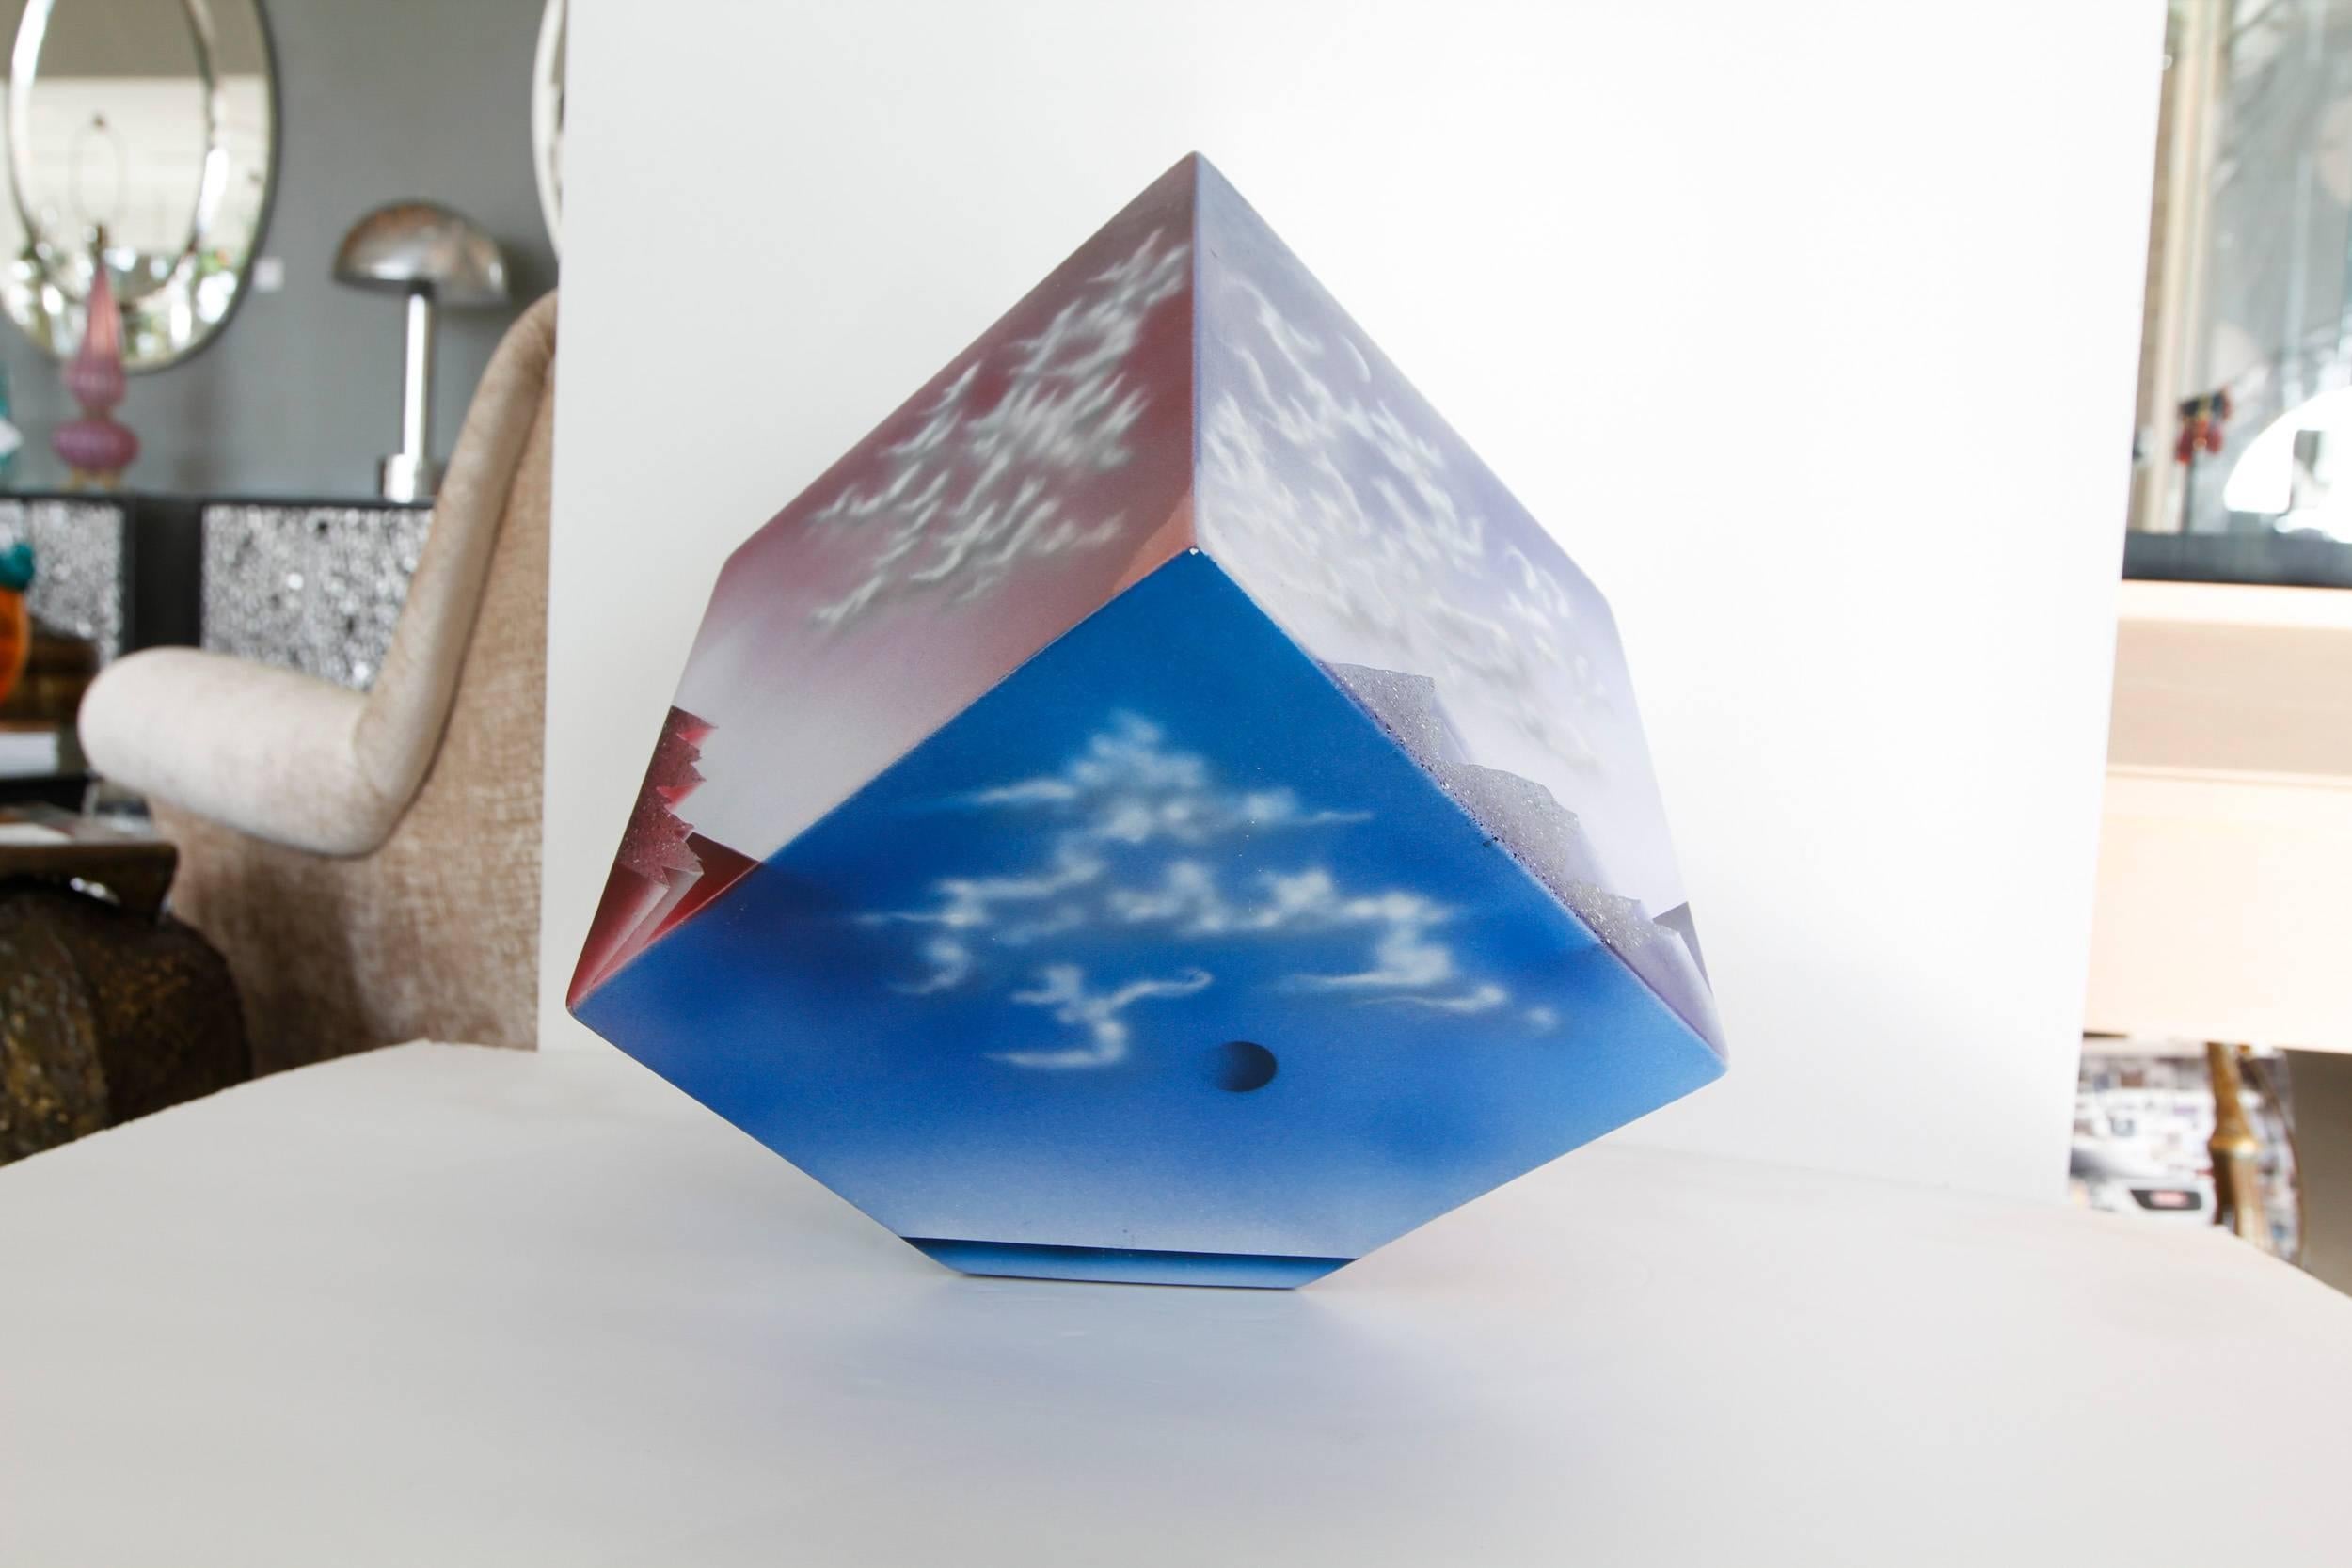 Artist made ceramic cube sculpture with atmospheric images of clouds artist unknown.